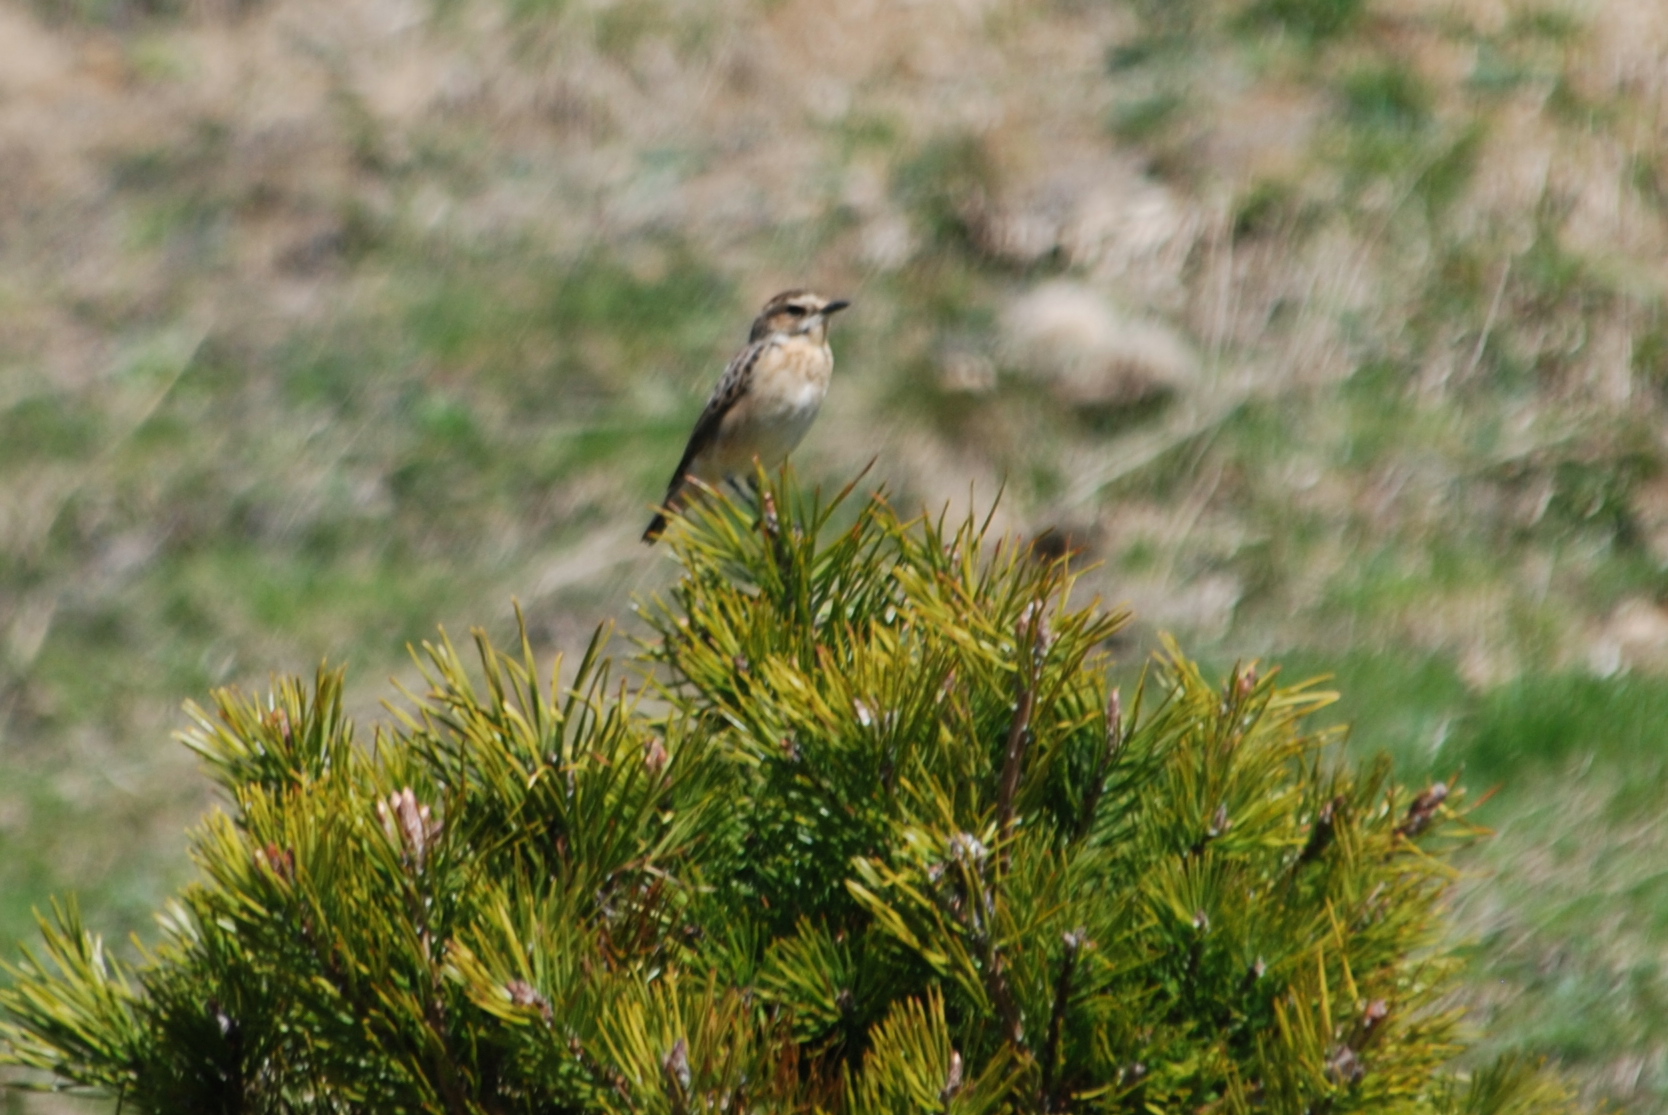 Click picture to see more Whinchats.